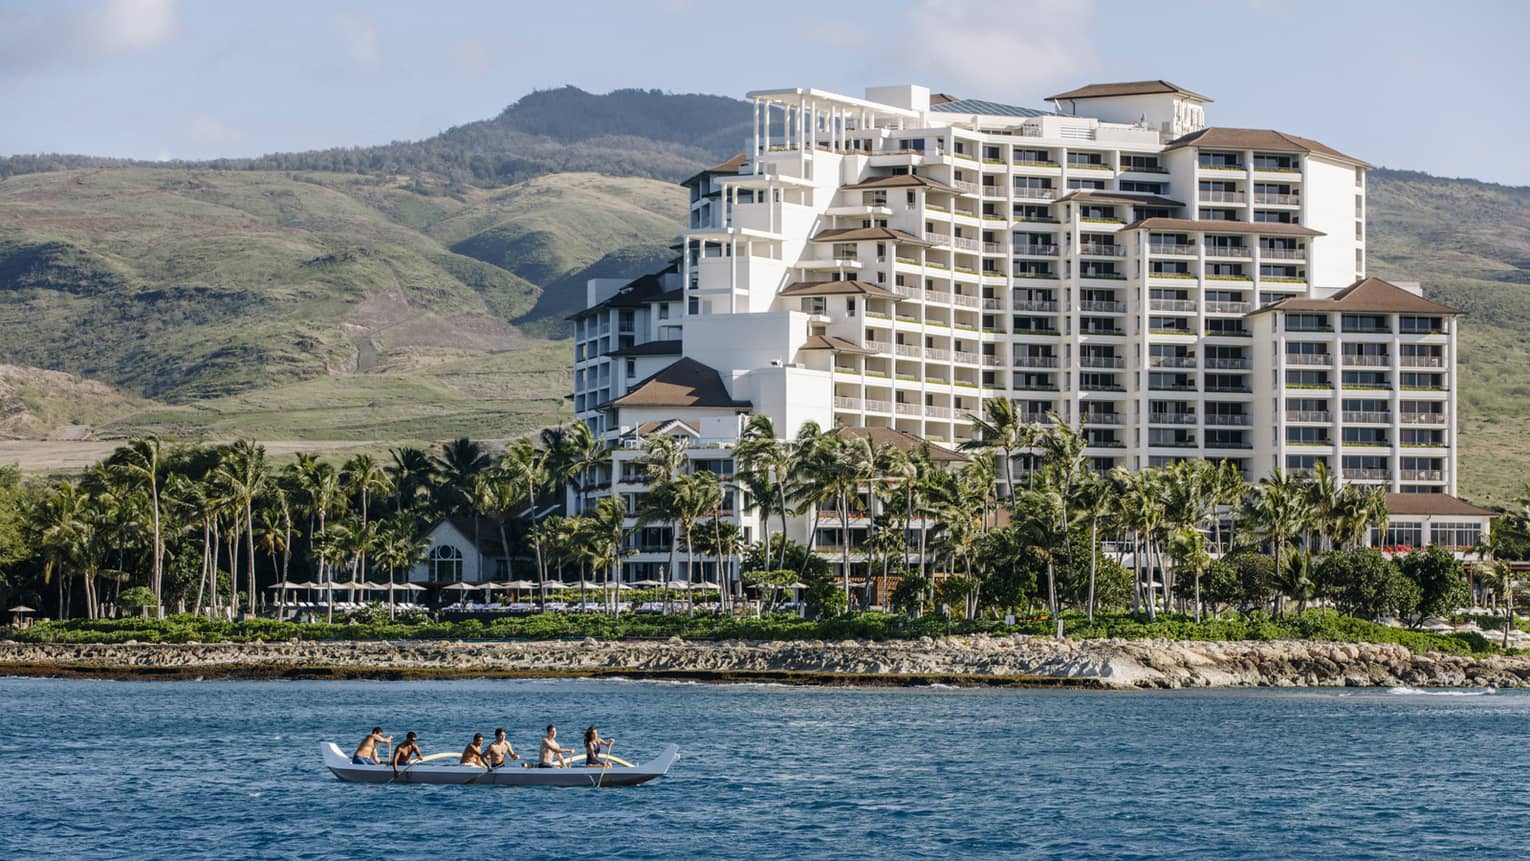 An outrigger canoe paddles past the Hotel